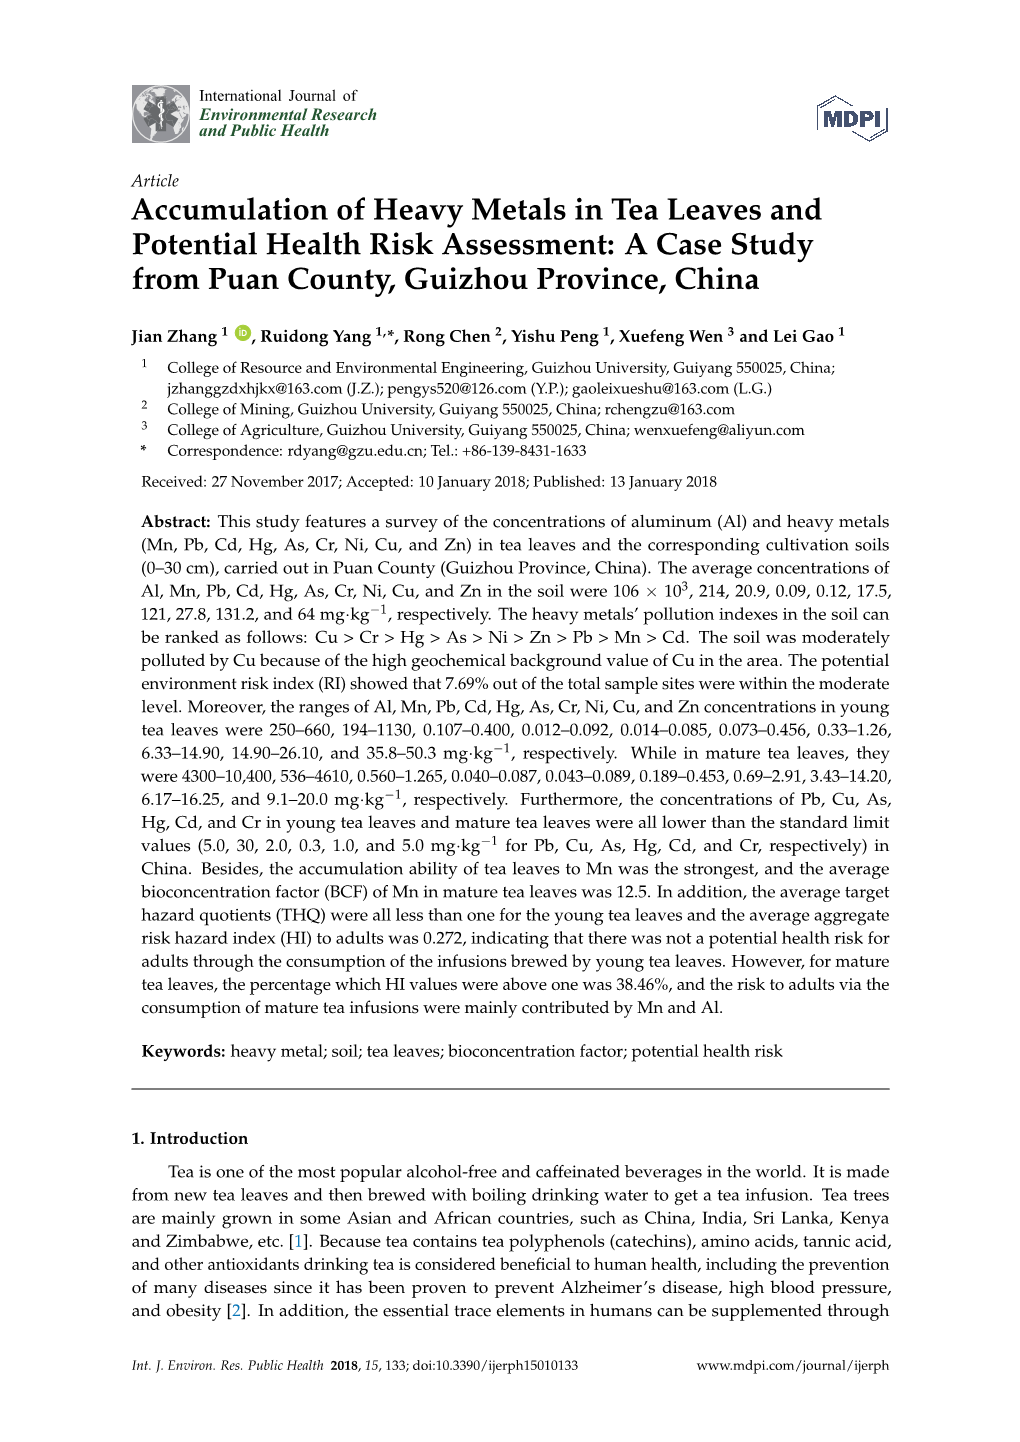 Accumulation of Heavy Metals in Tea Leaves and Potential Health Risk Assessment: a Case Study from Puan County, Guizhou Province, China